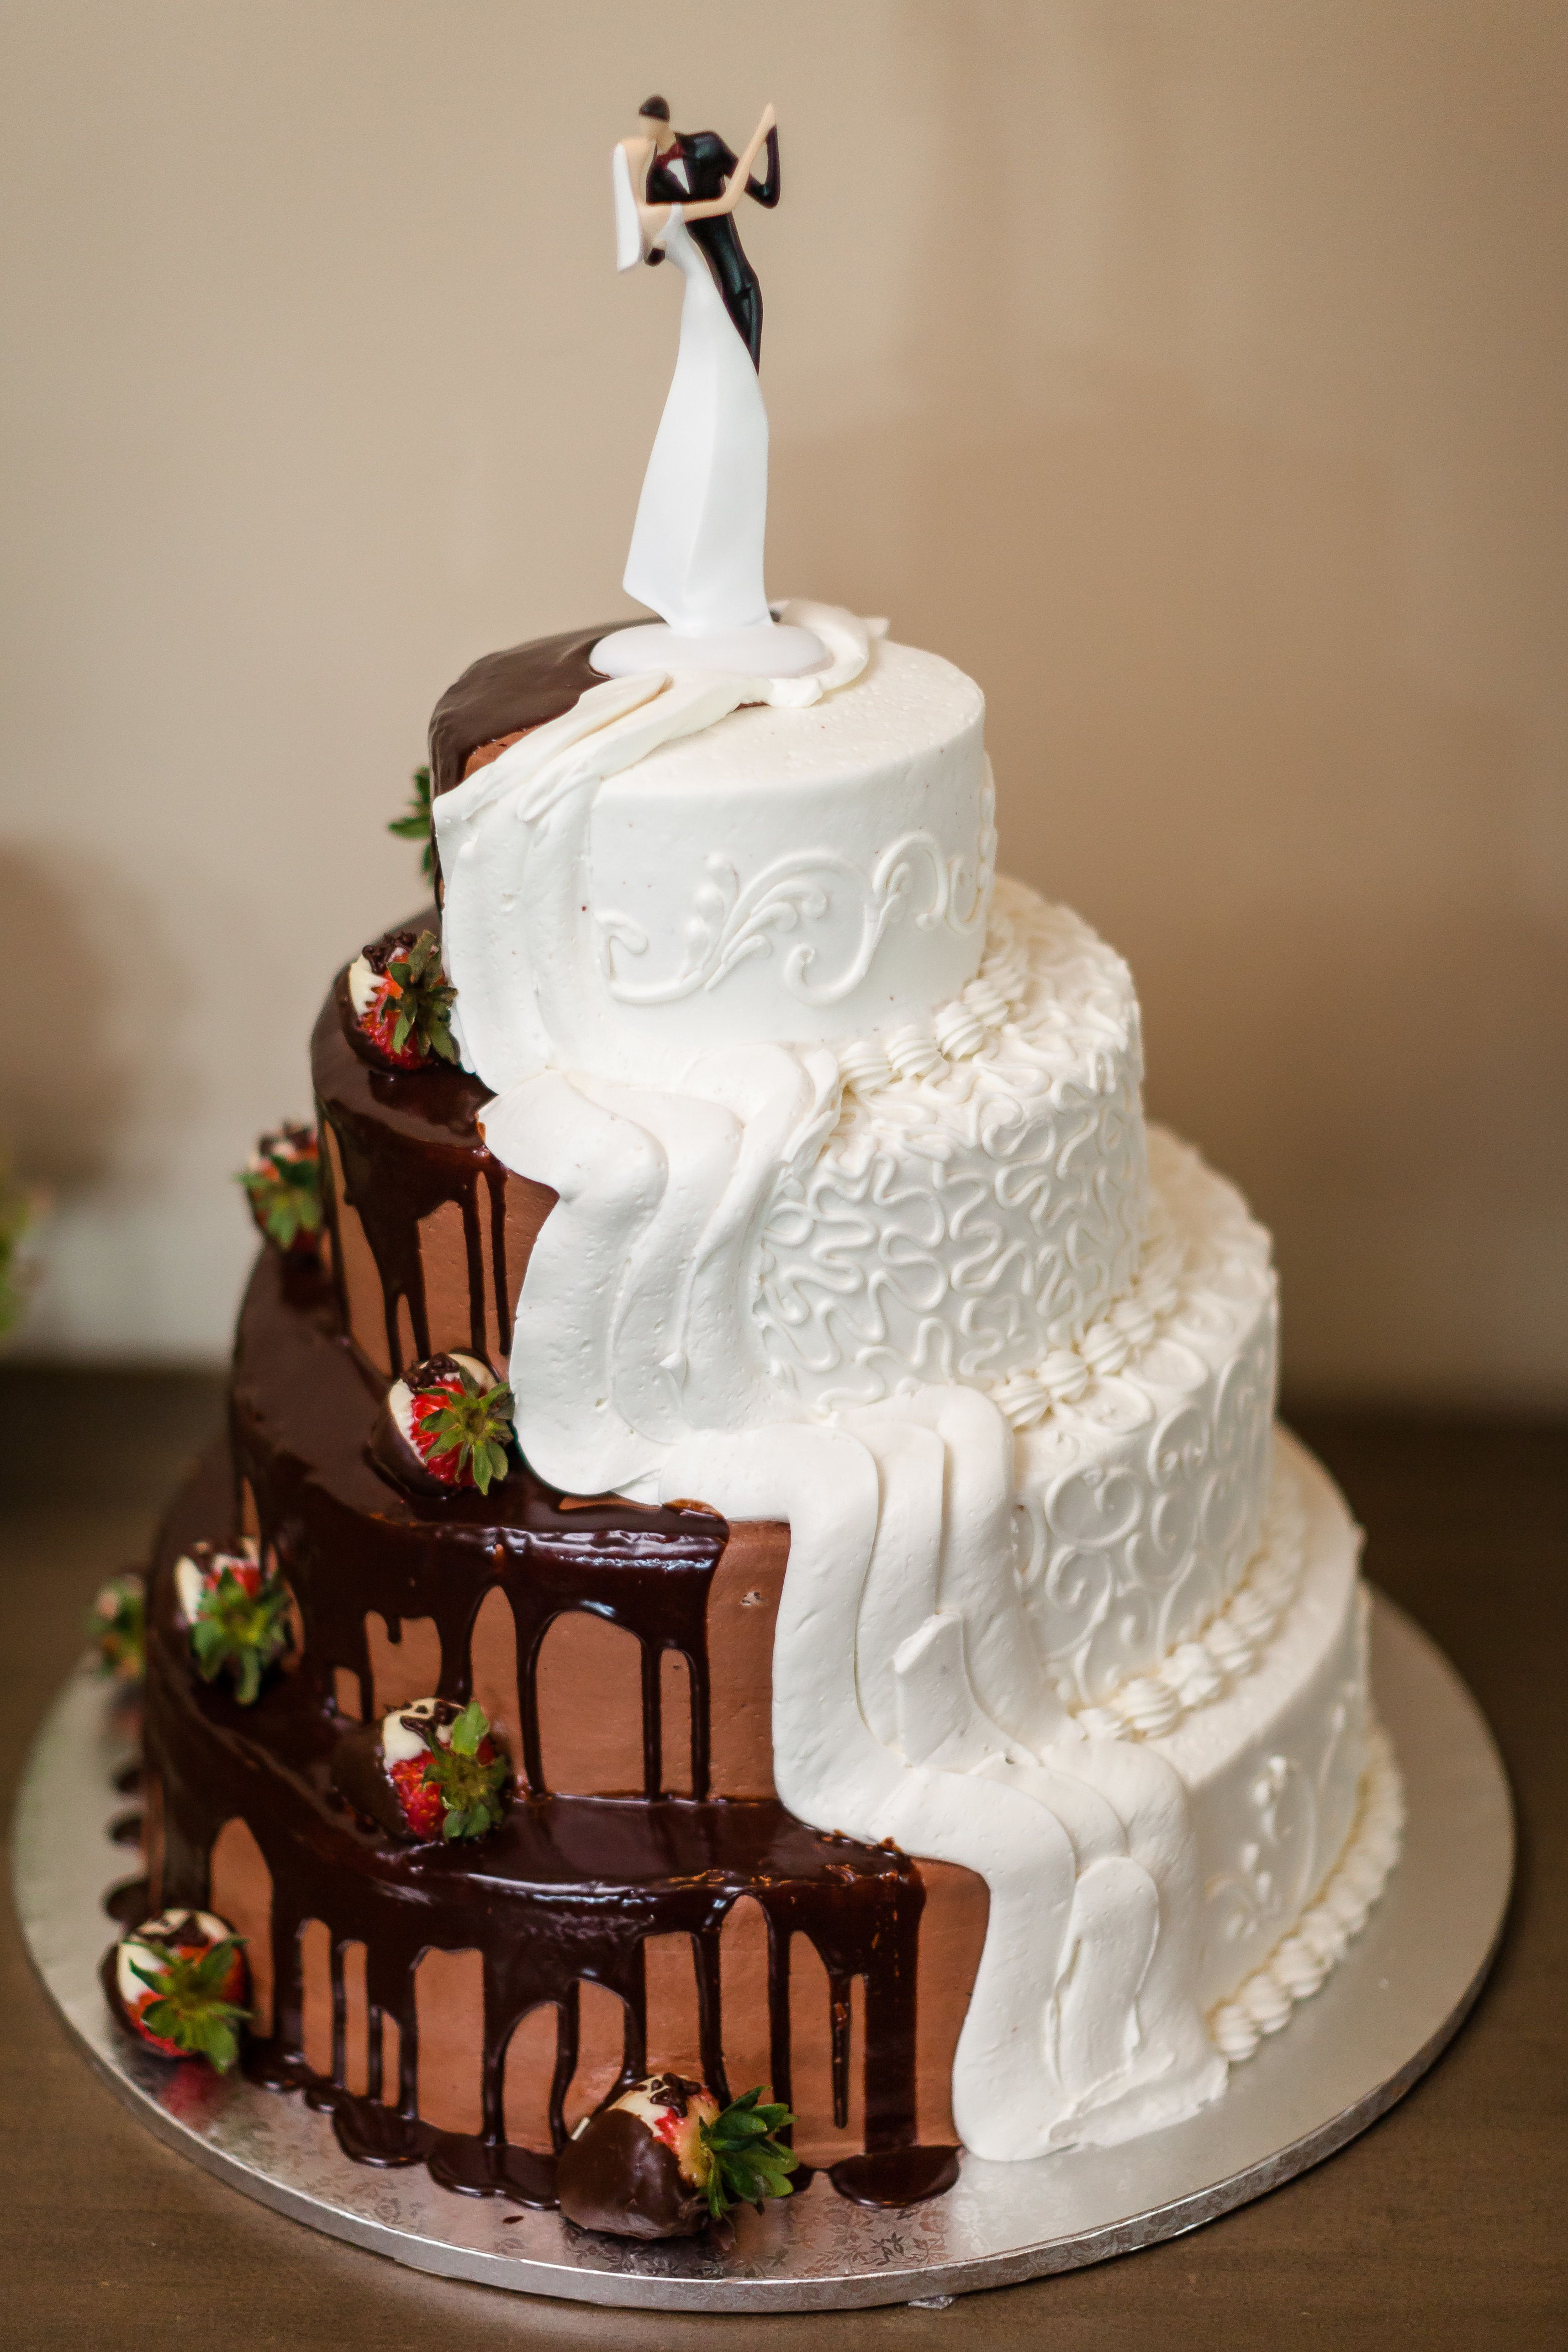 Wedding Cakes Bride And Groom
 bined Chocolate and Vanilla Bride and Groom s Cake